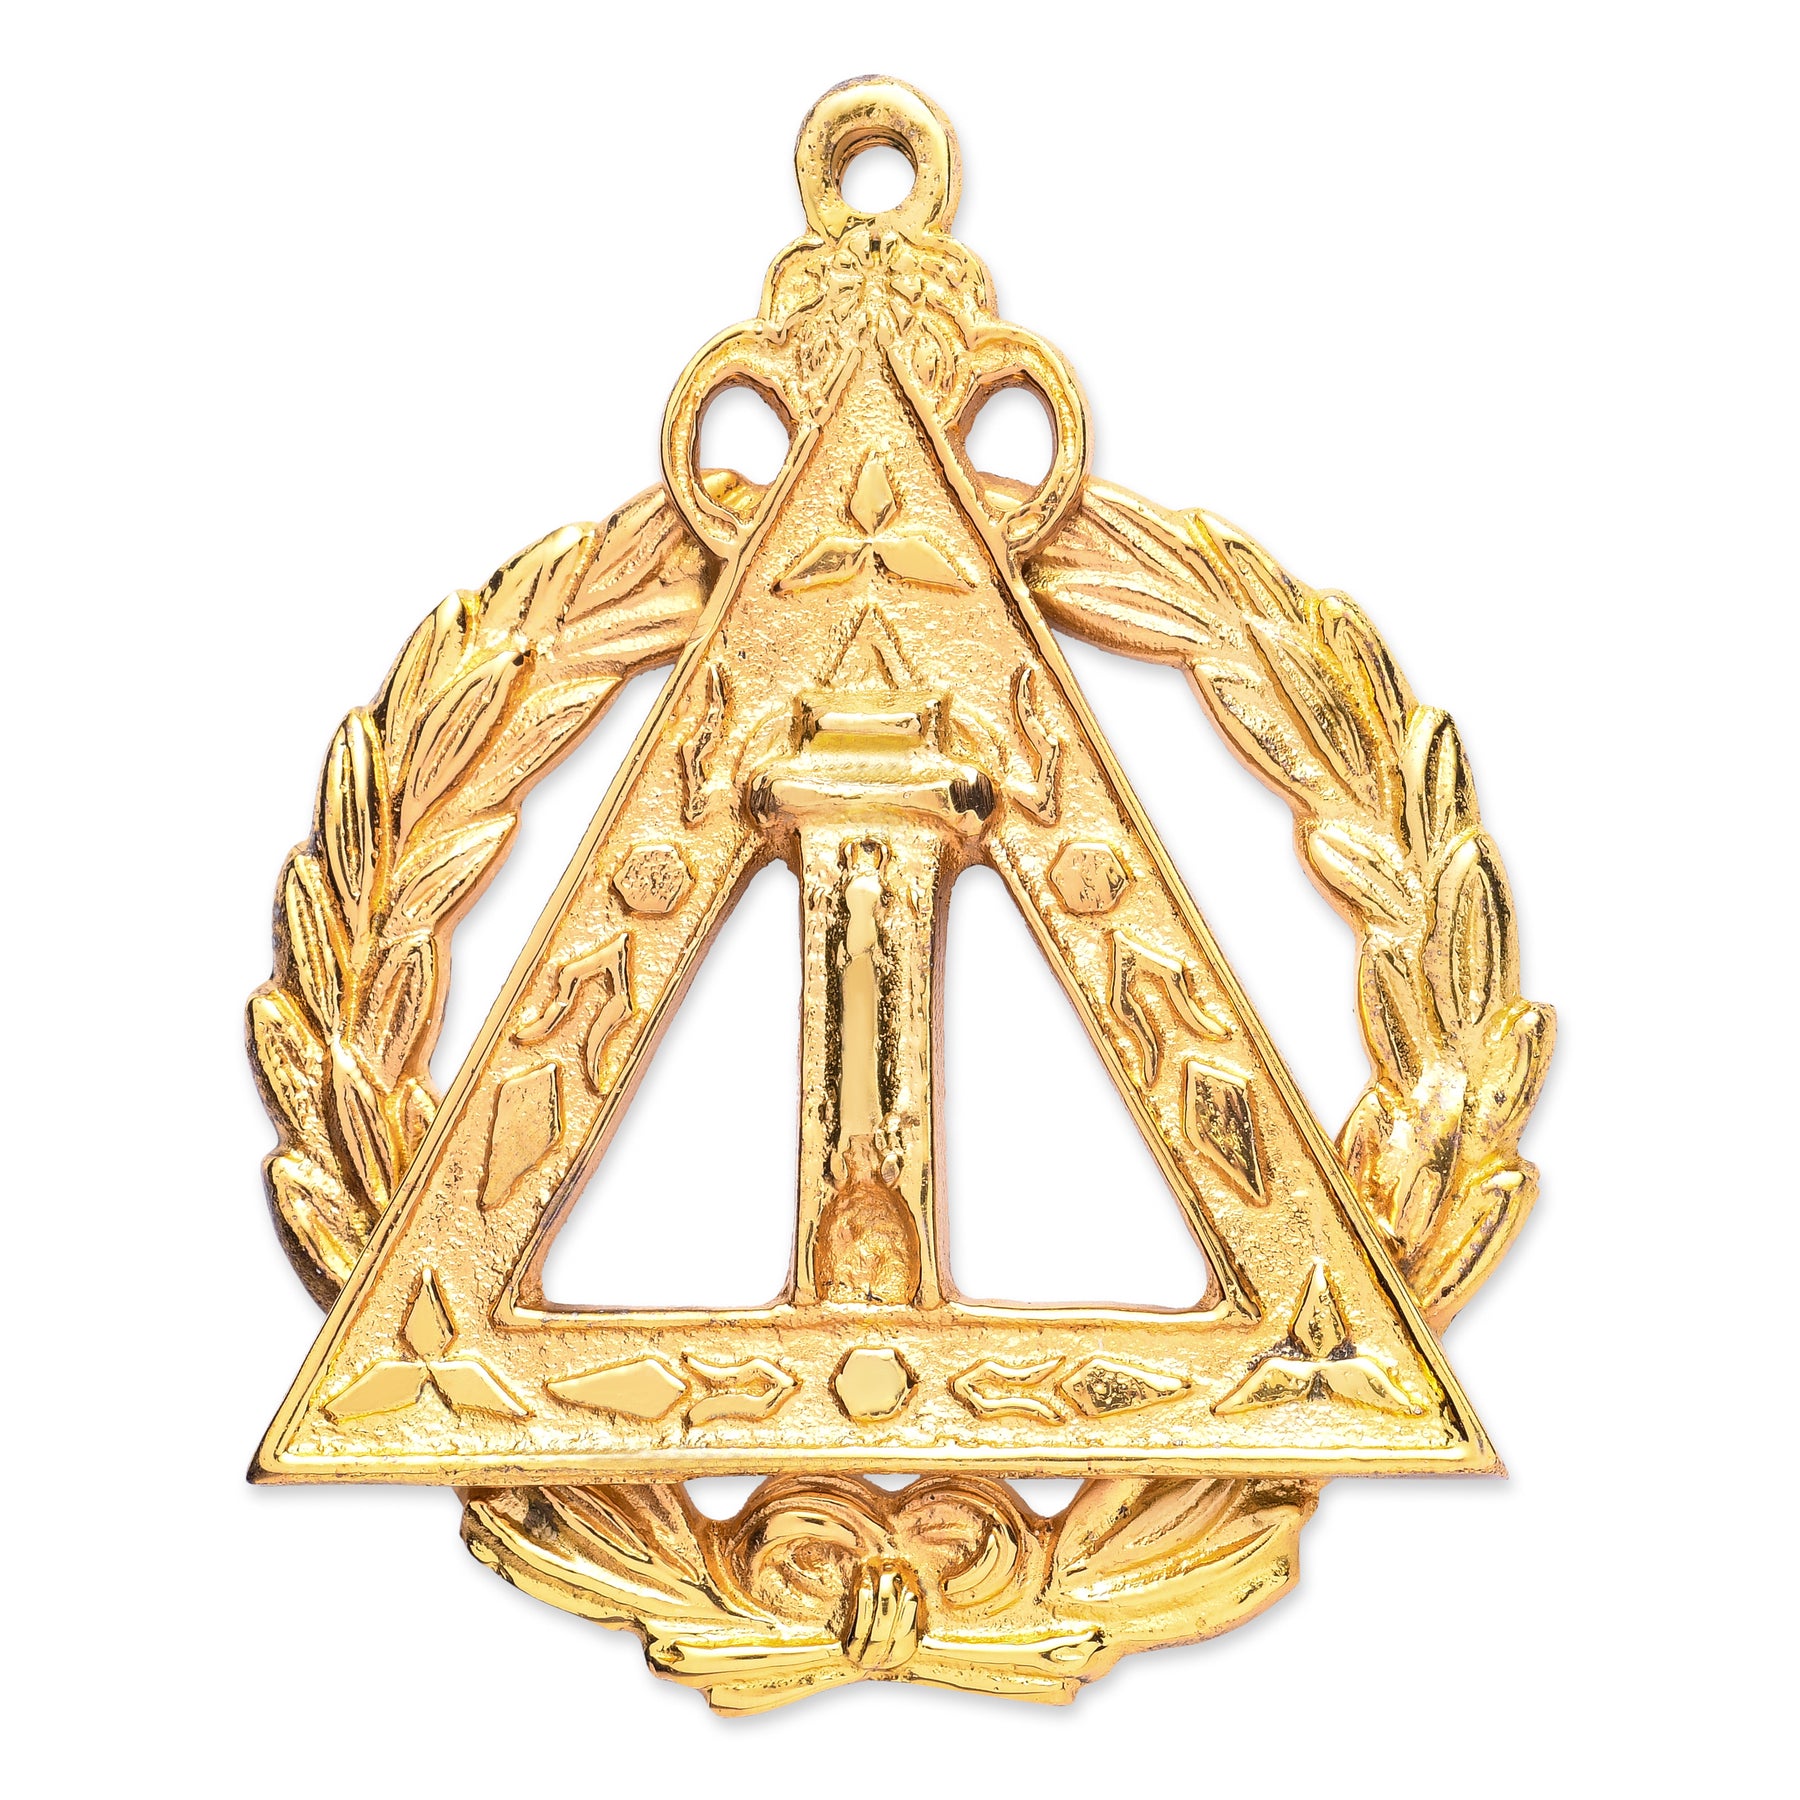 Grand Scribe Royal Arch Chapter Officer Collar Jewel - Gold Plated - Bricks Masons